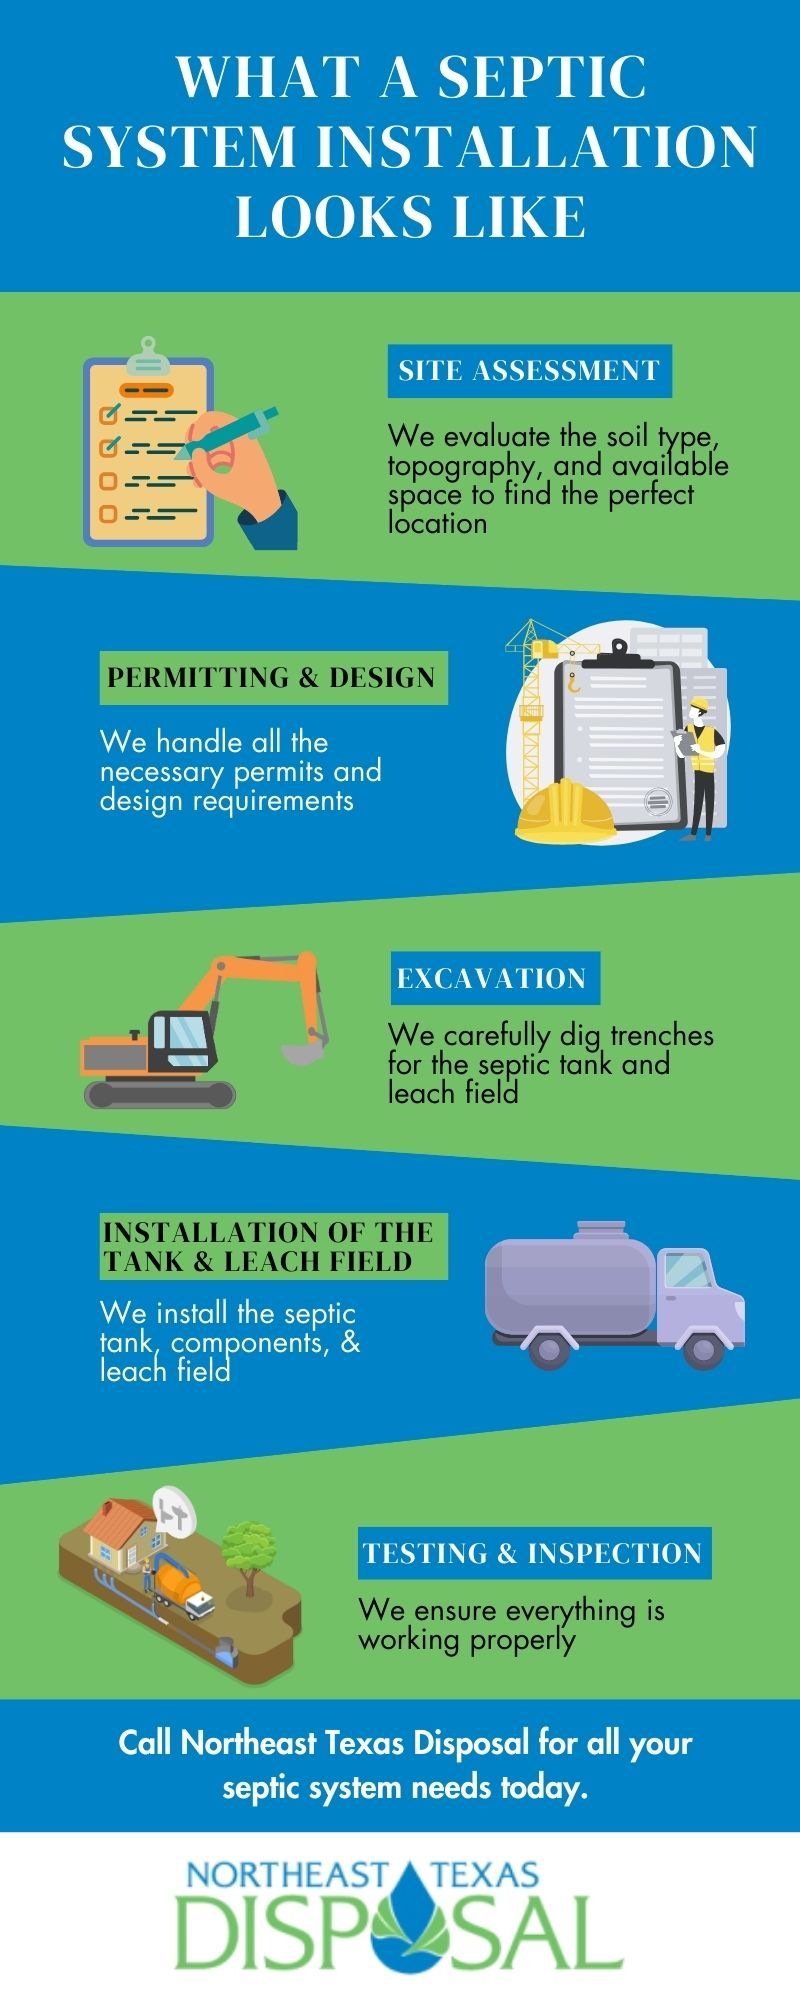 M38733 - Northeast Texas Disposal Infographic What a Septic System Installation Looks Like.jpg